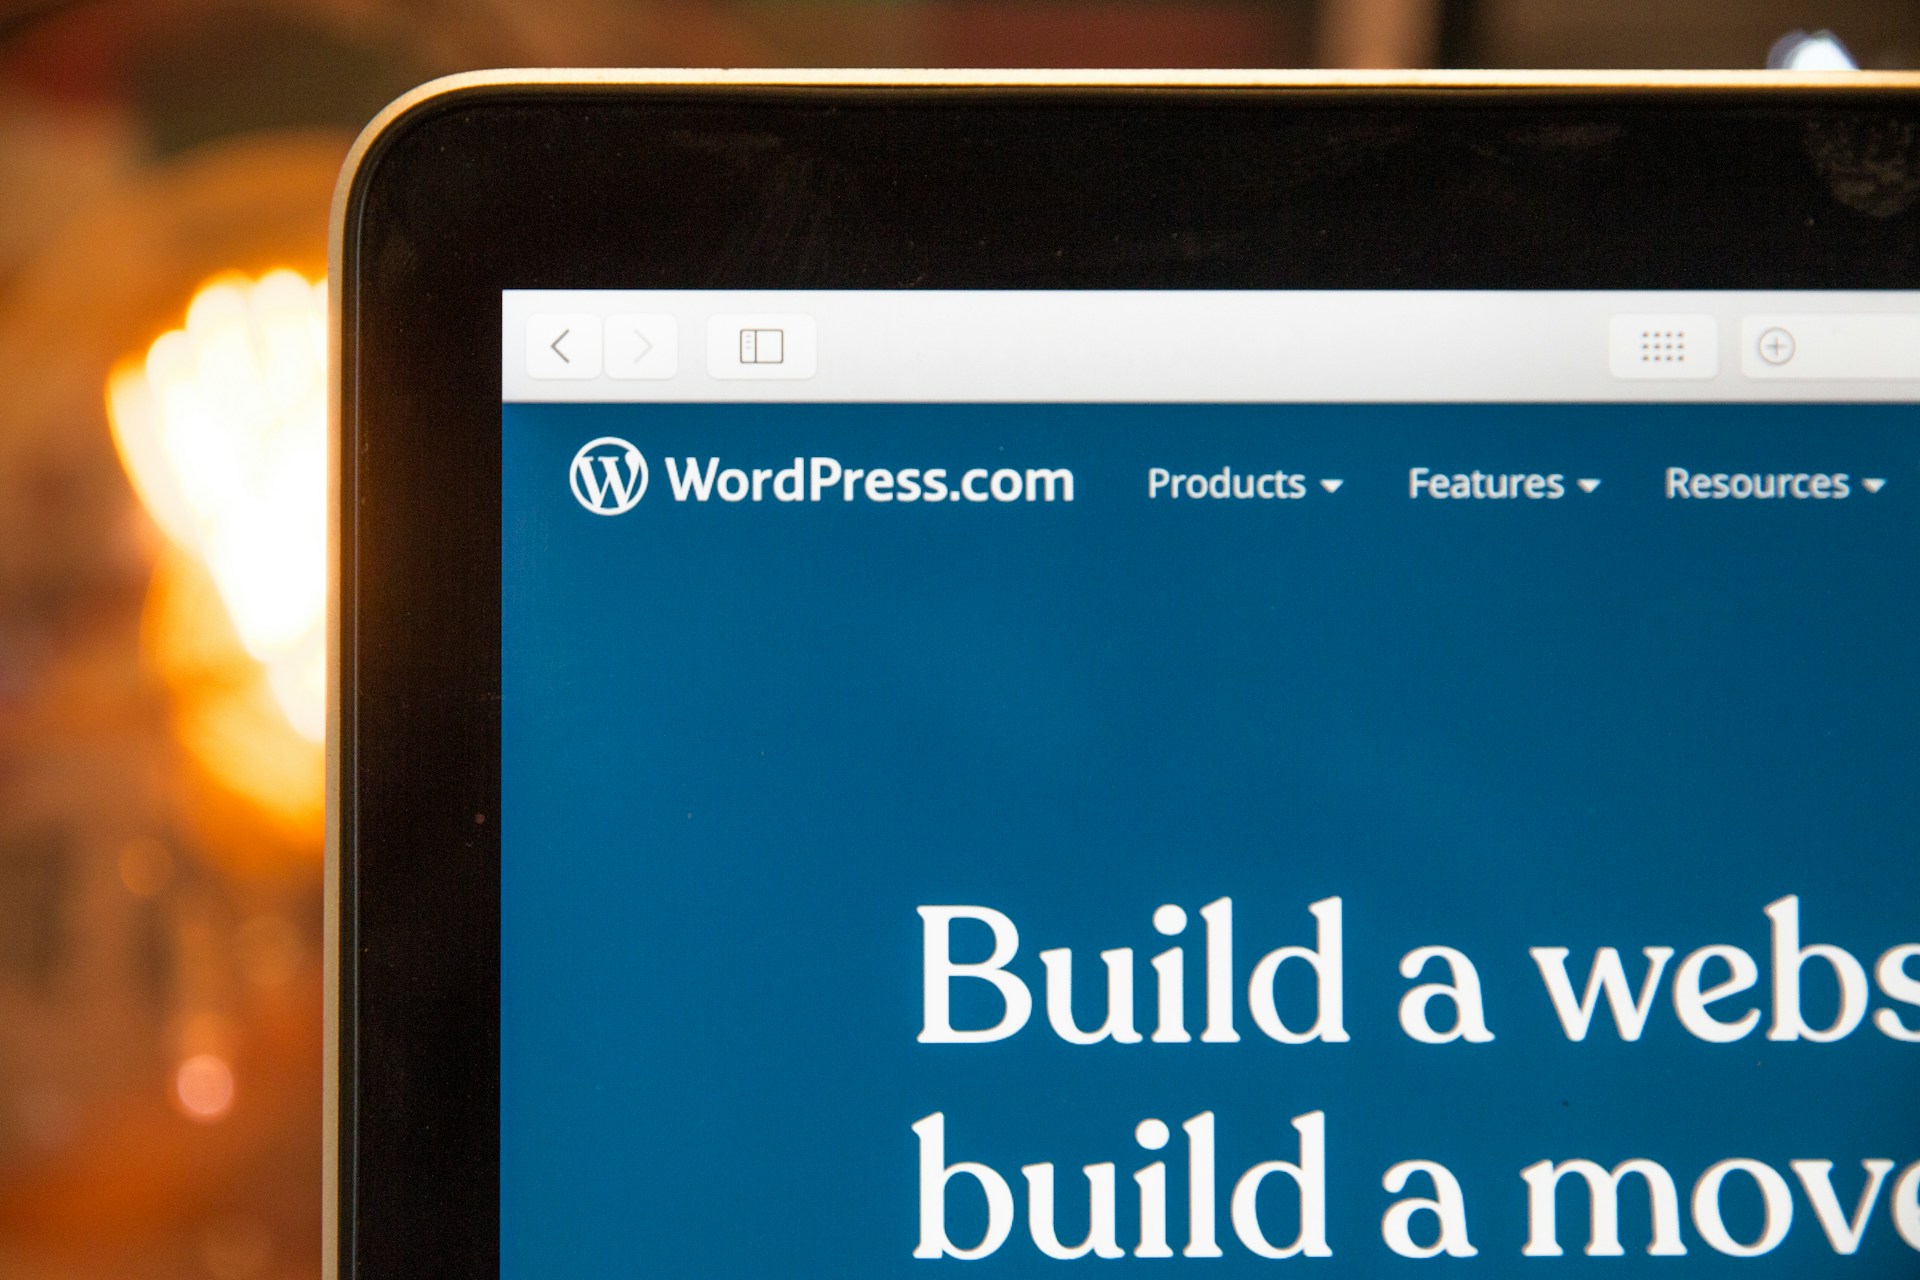 the WordPress site building page